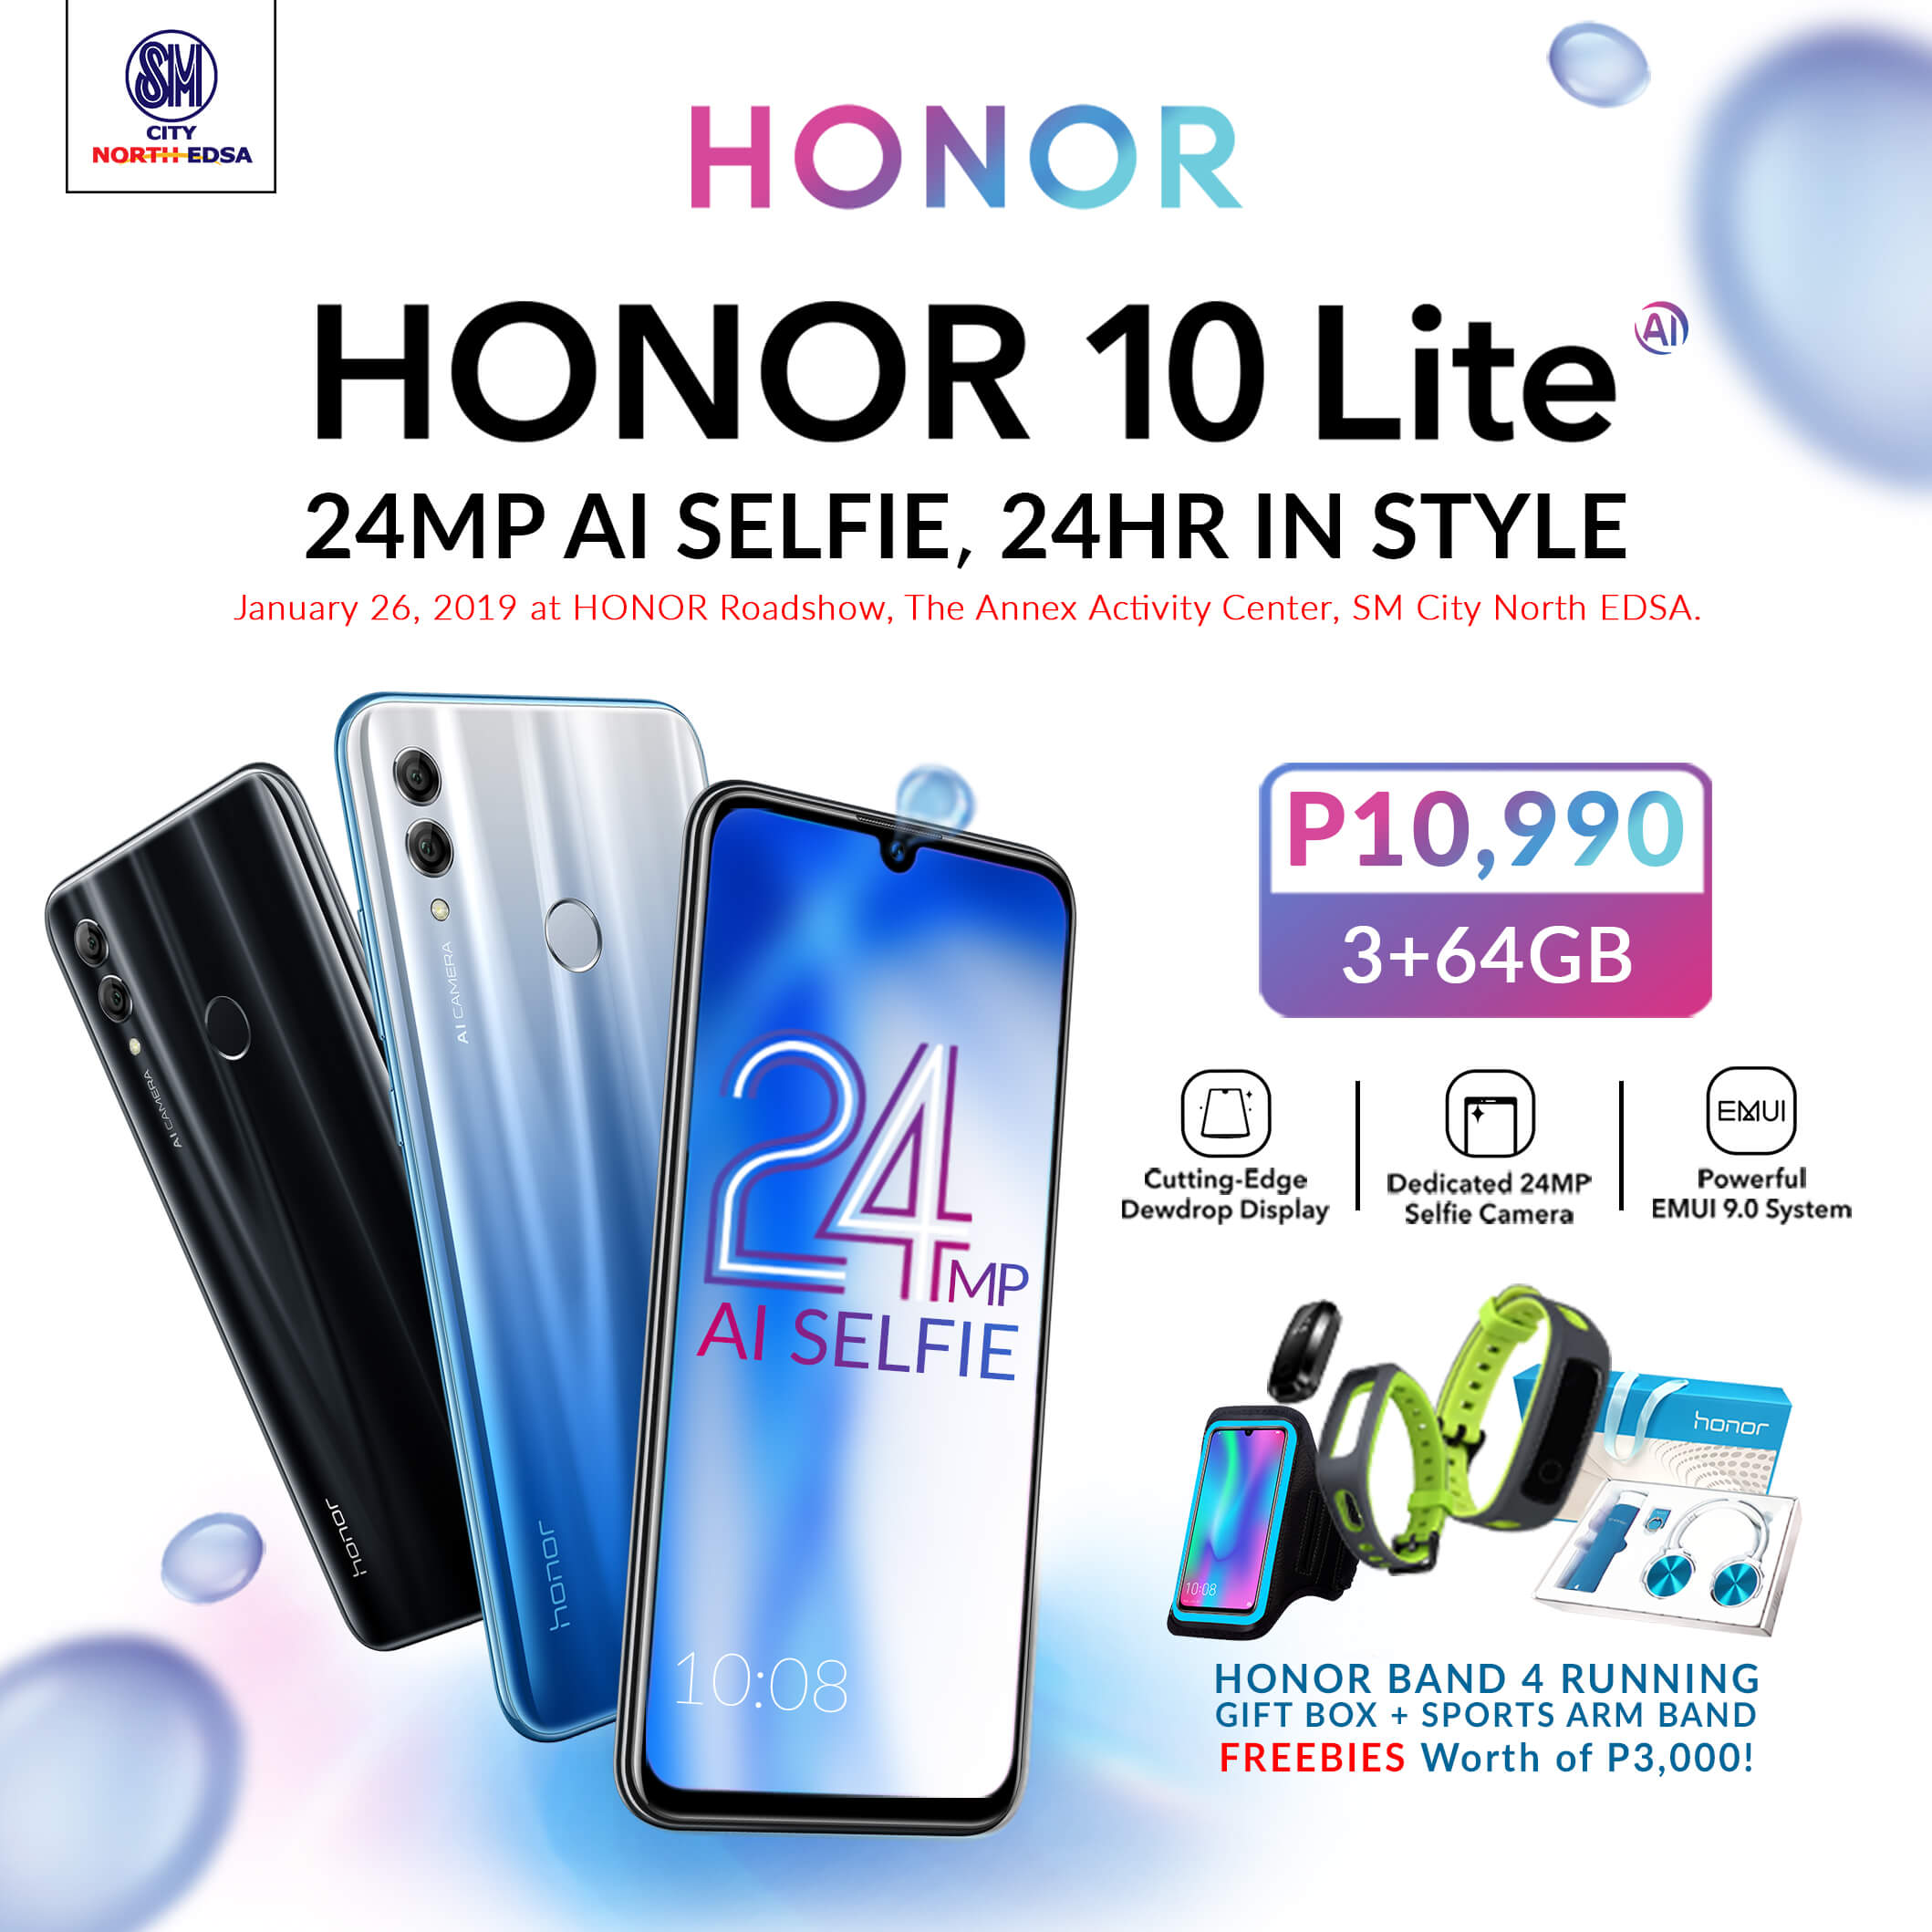 Get Awesome Freebies When You Purchase an Honor 10 Lite on January 26!